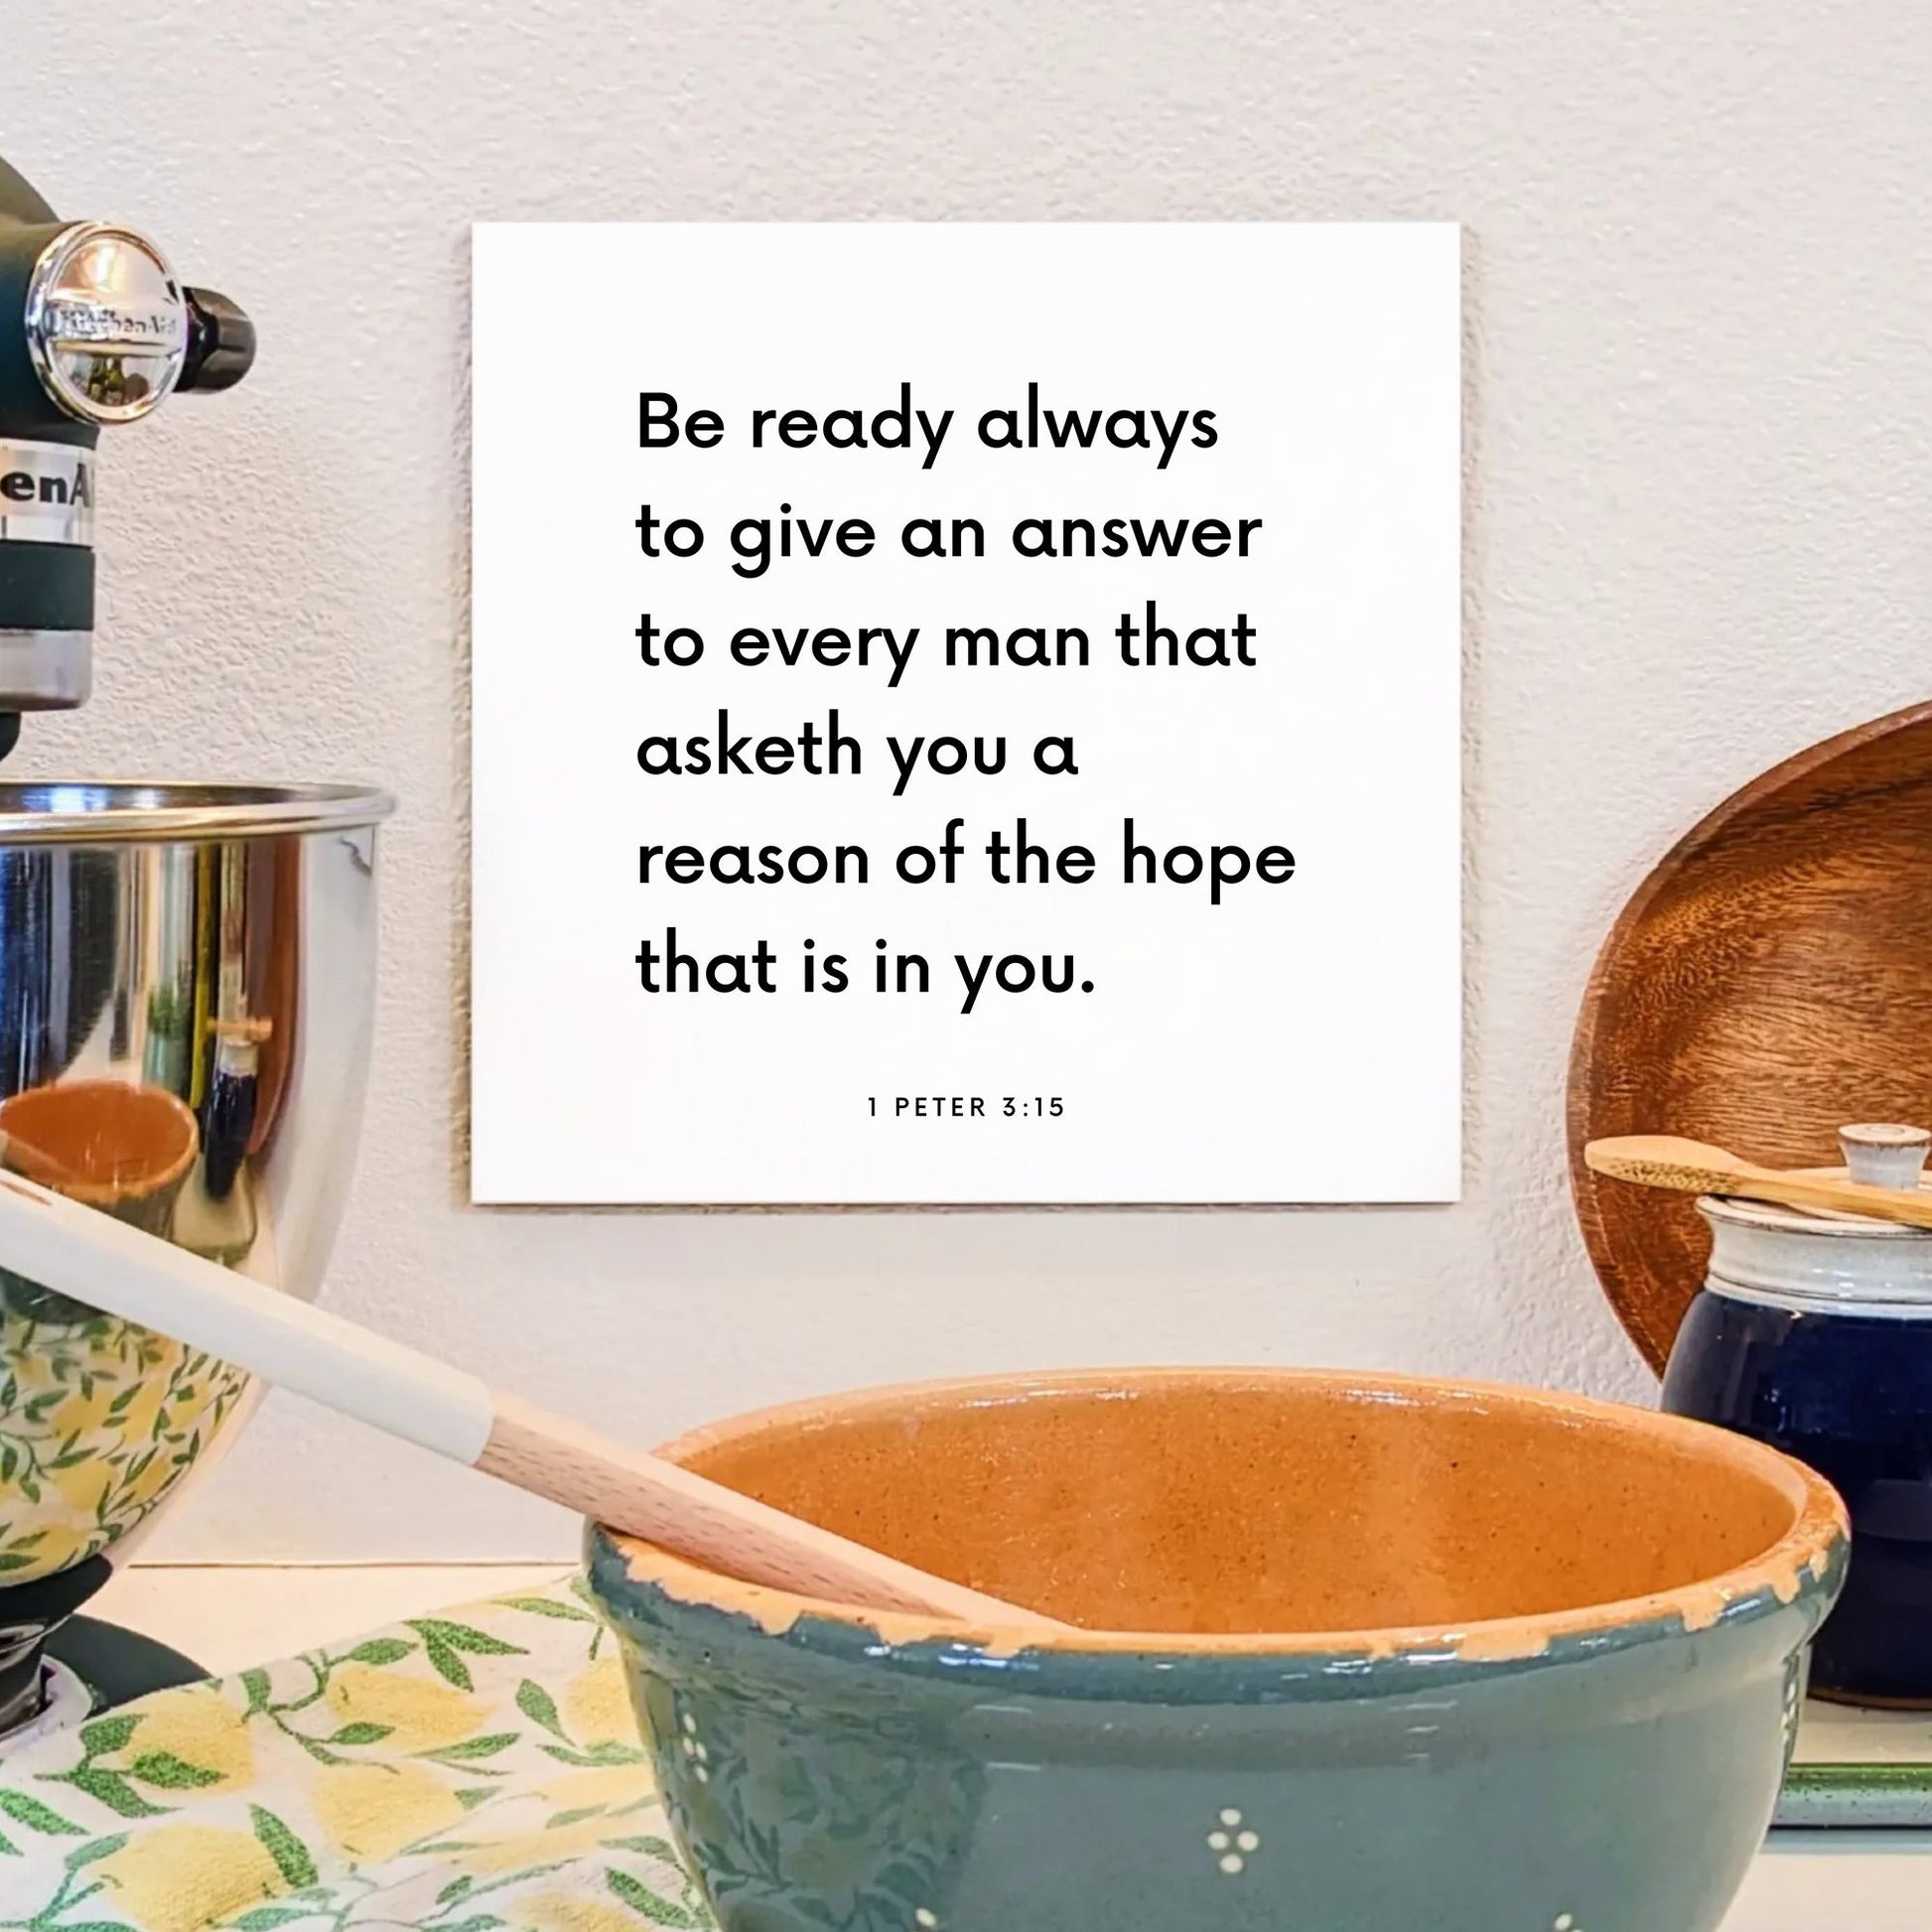 Kitchen mouting of the scripture tile for 1 Peter 3:15 - "Be ready always to give an answer to every man that asketh"